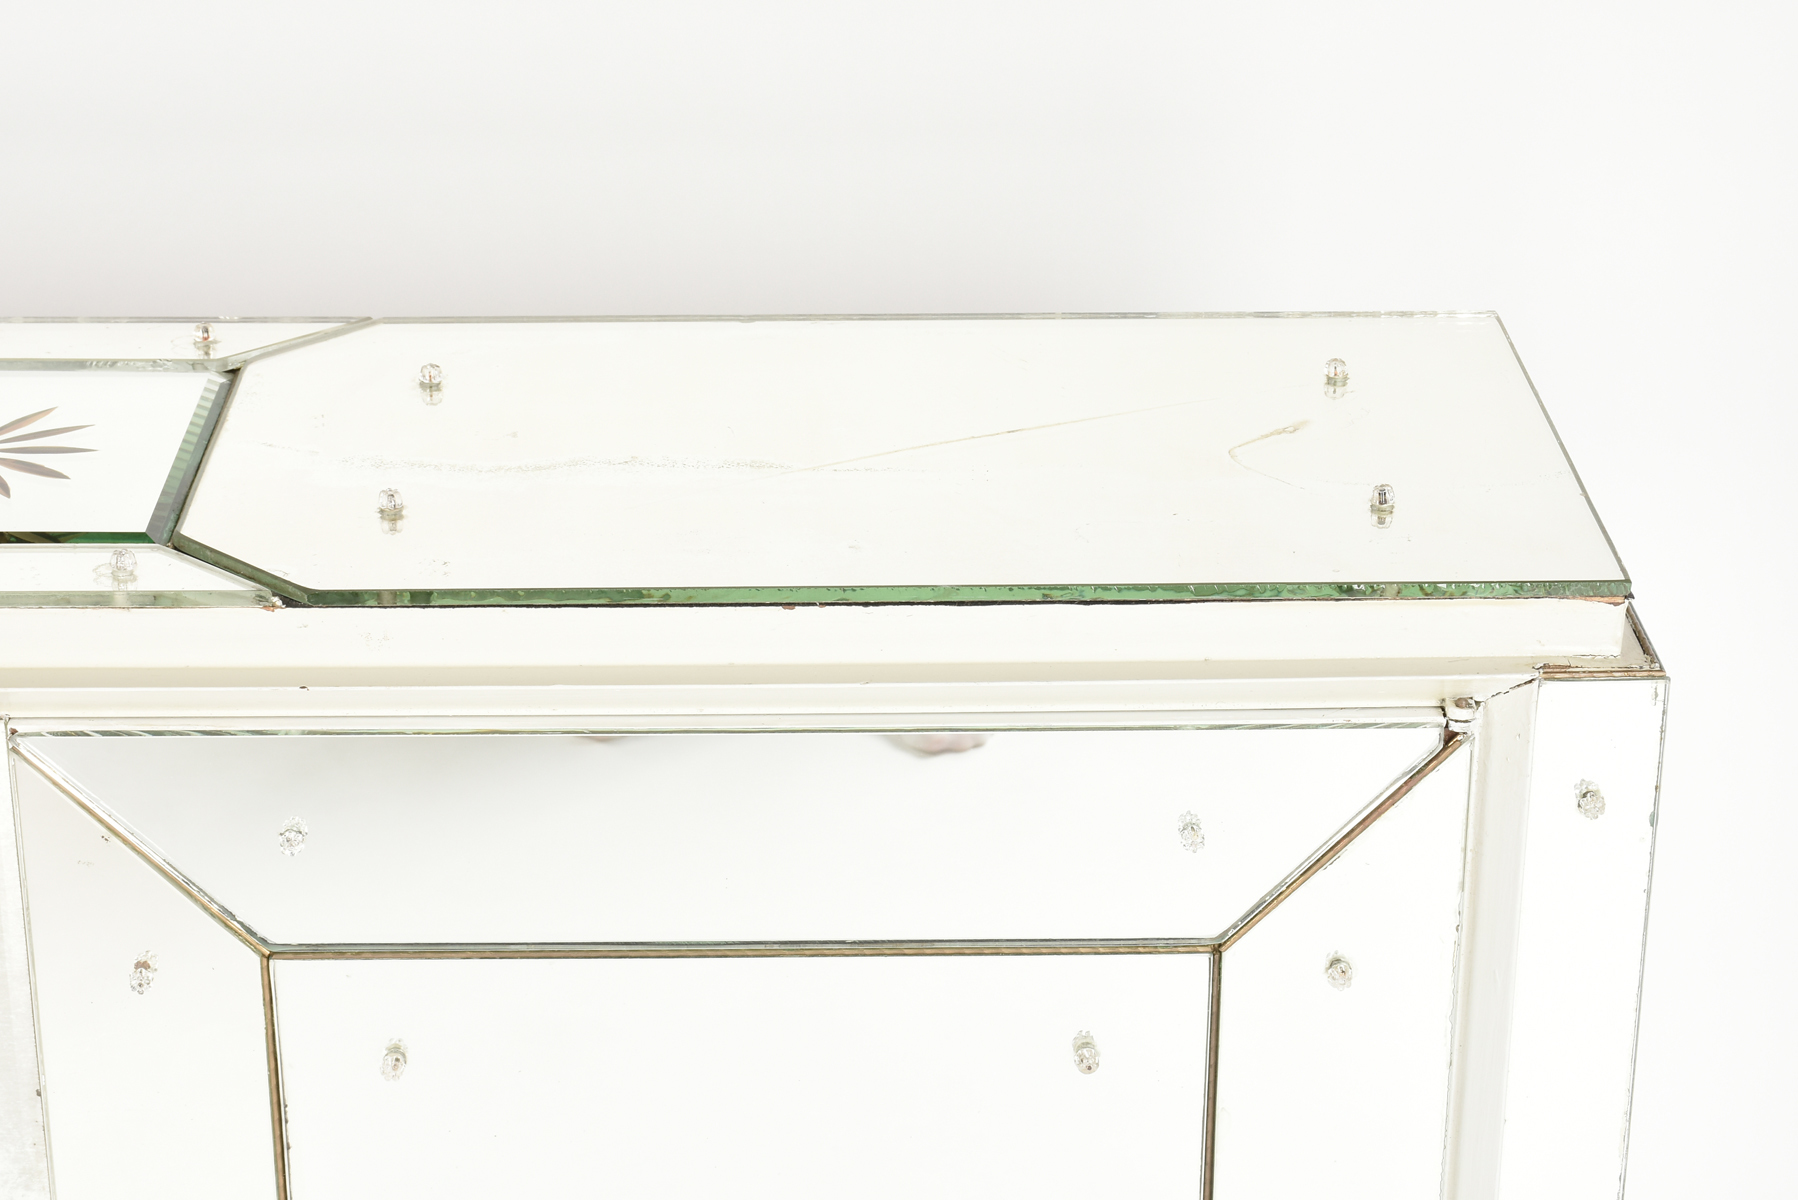 A FRENCH ART MODERNE MIRRORED AND WHITE PAINTED CREDENZA,1950s, in a Hollywood Regency style with - Image 6 of 8